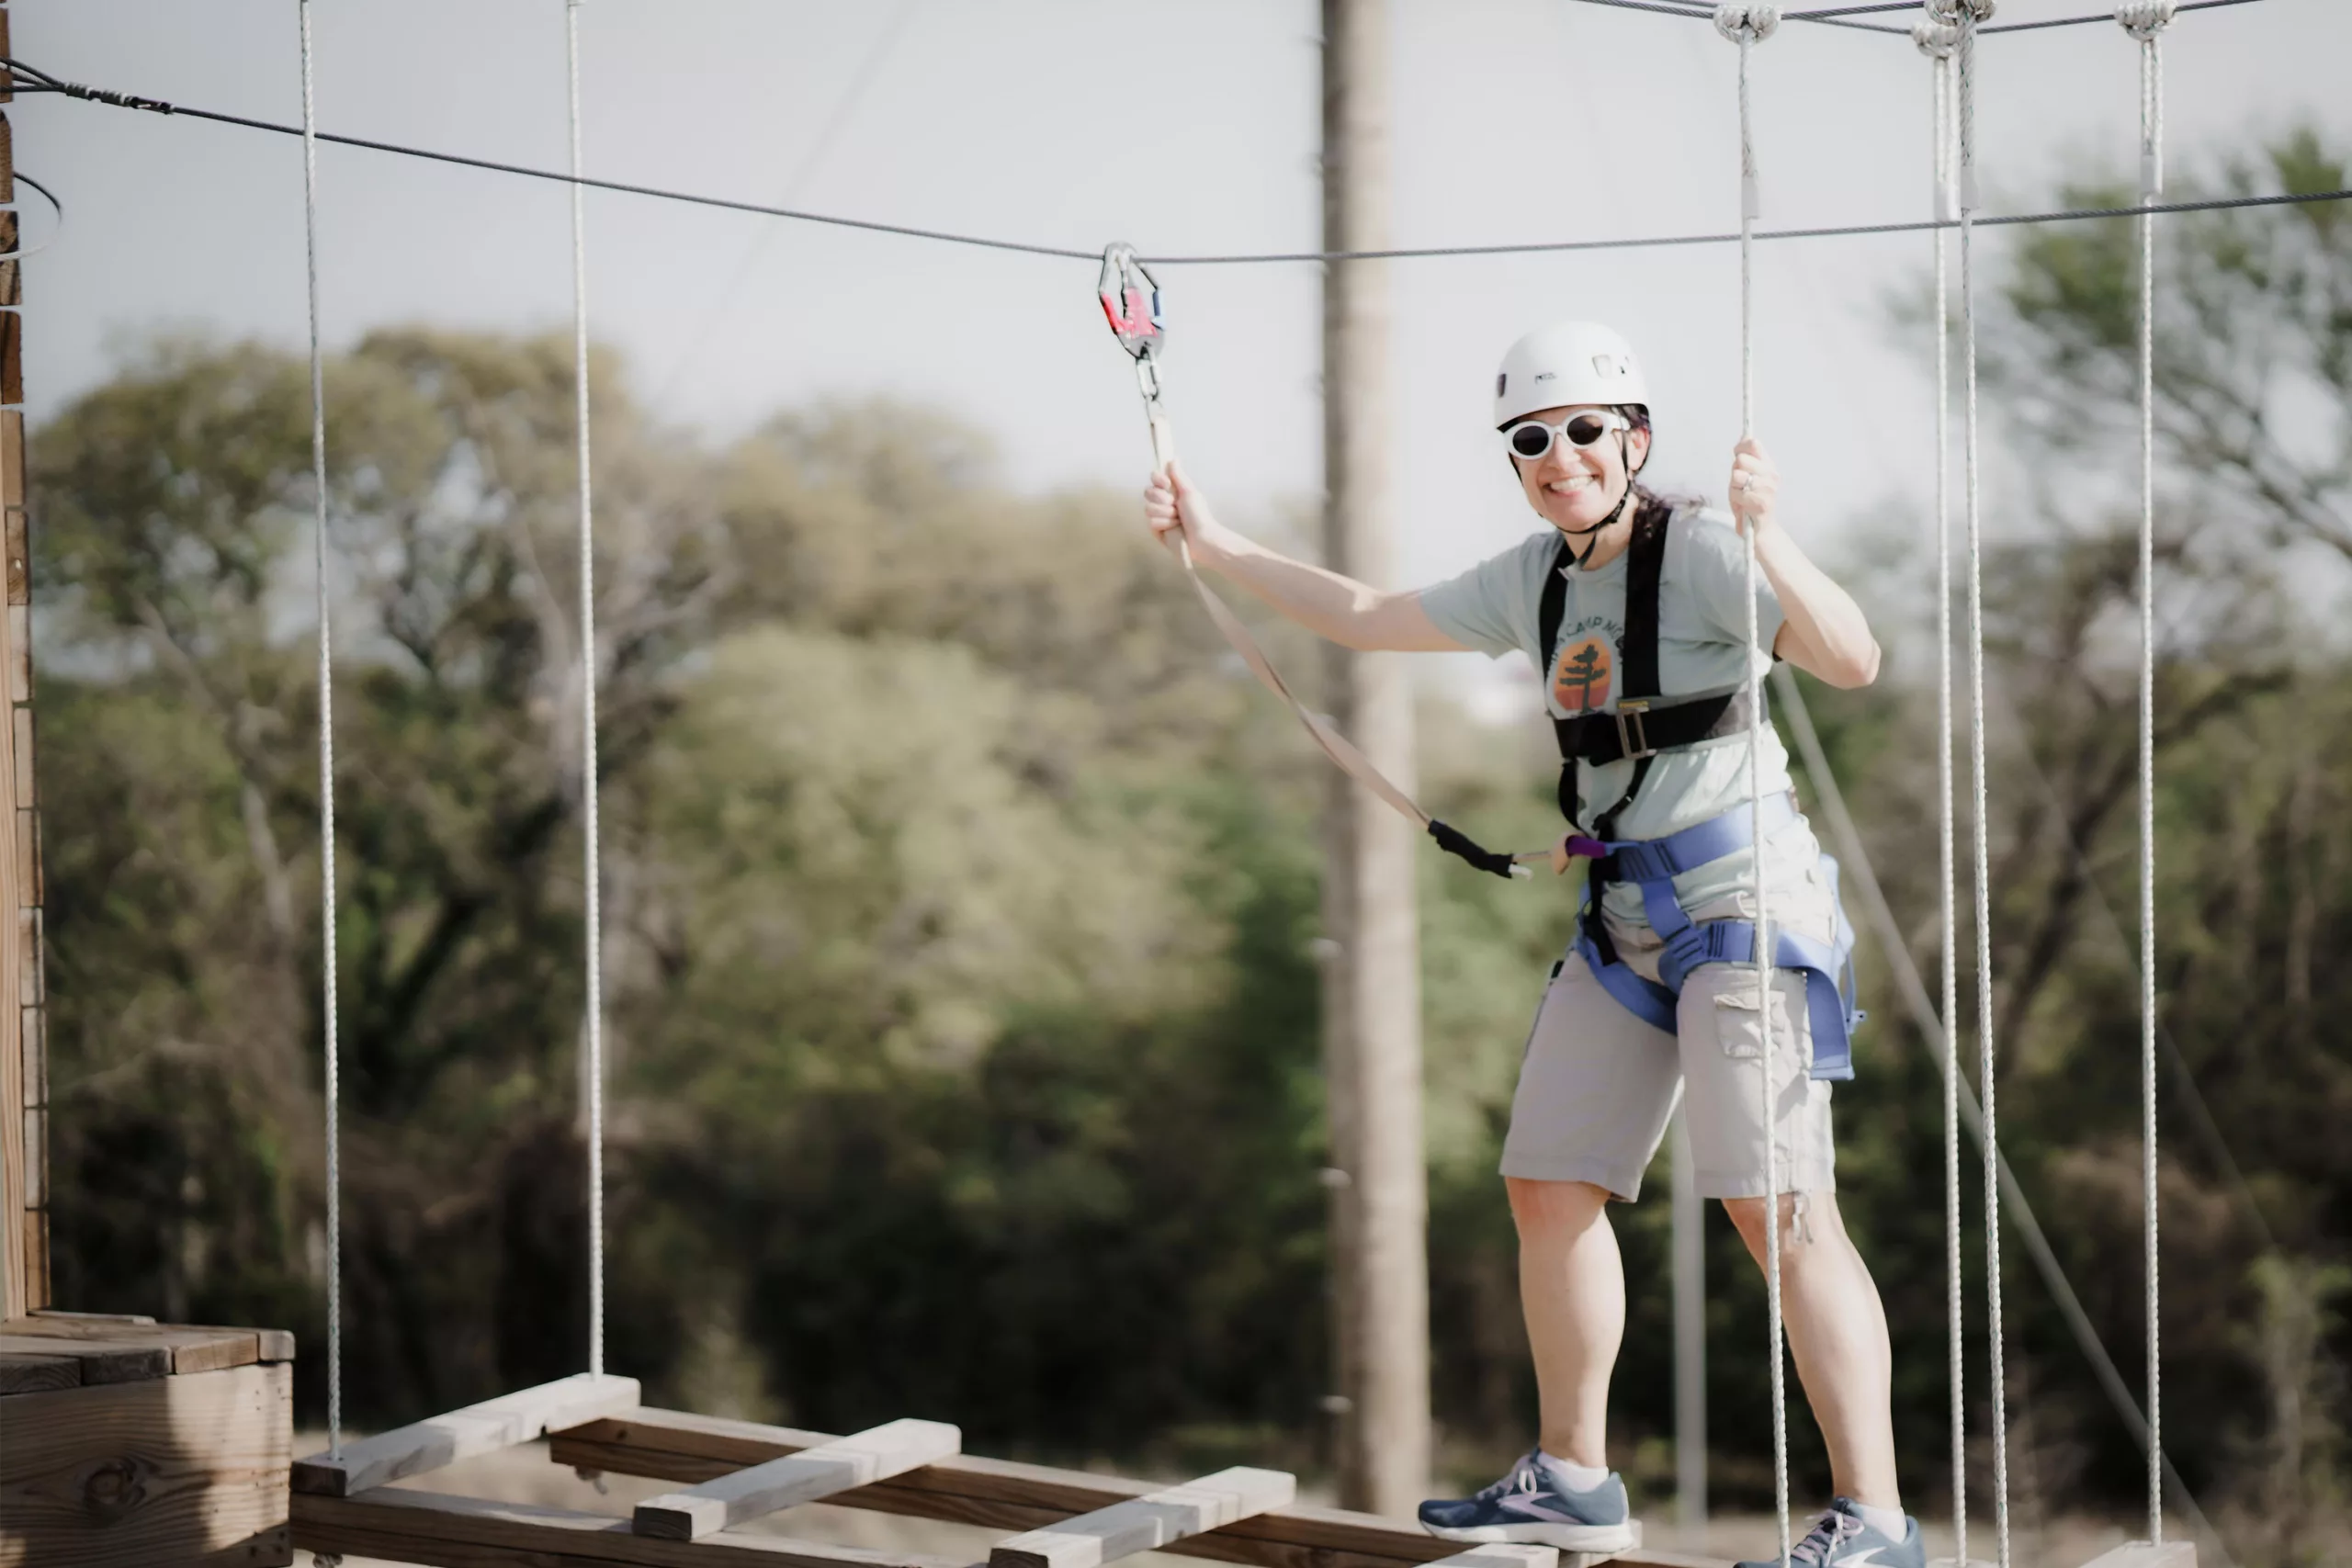 A woman wearing a safety helmet and sunglasses smiles as she navigates a high ropes course.